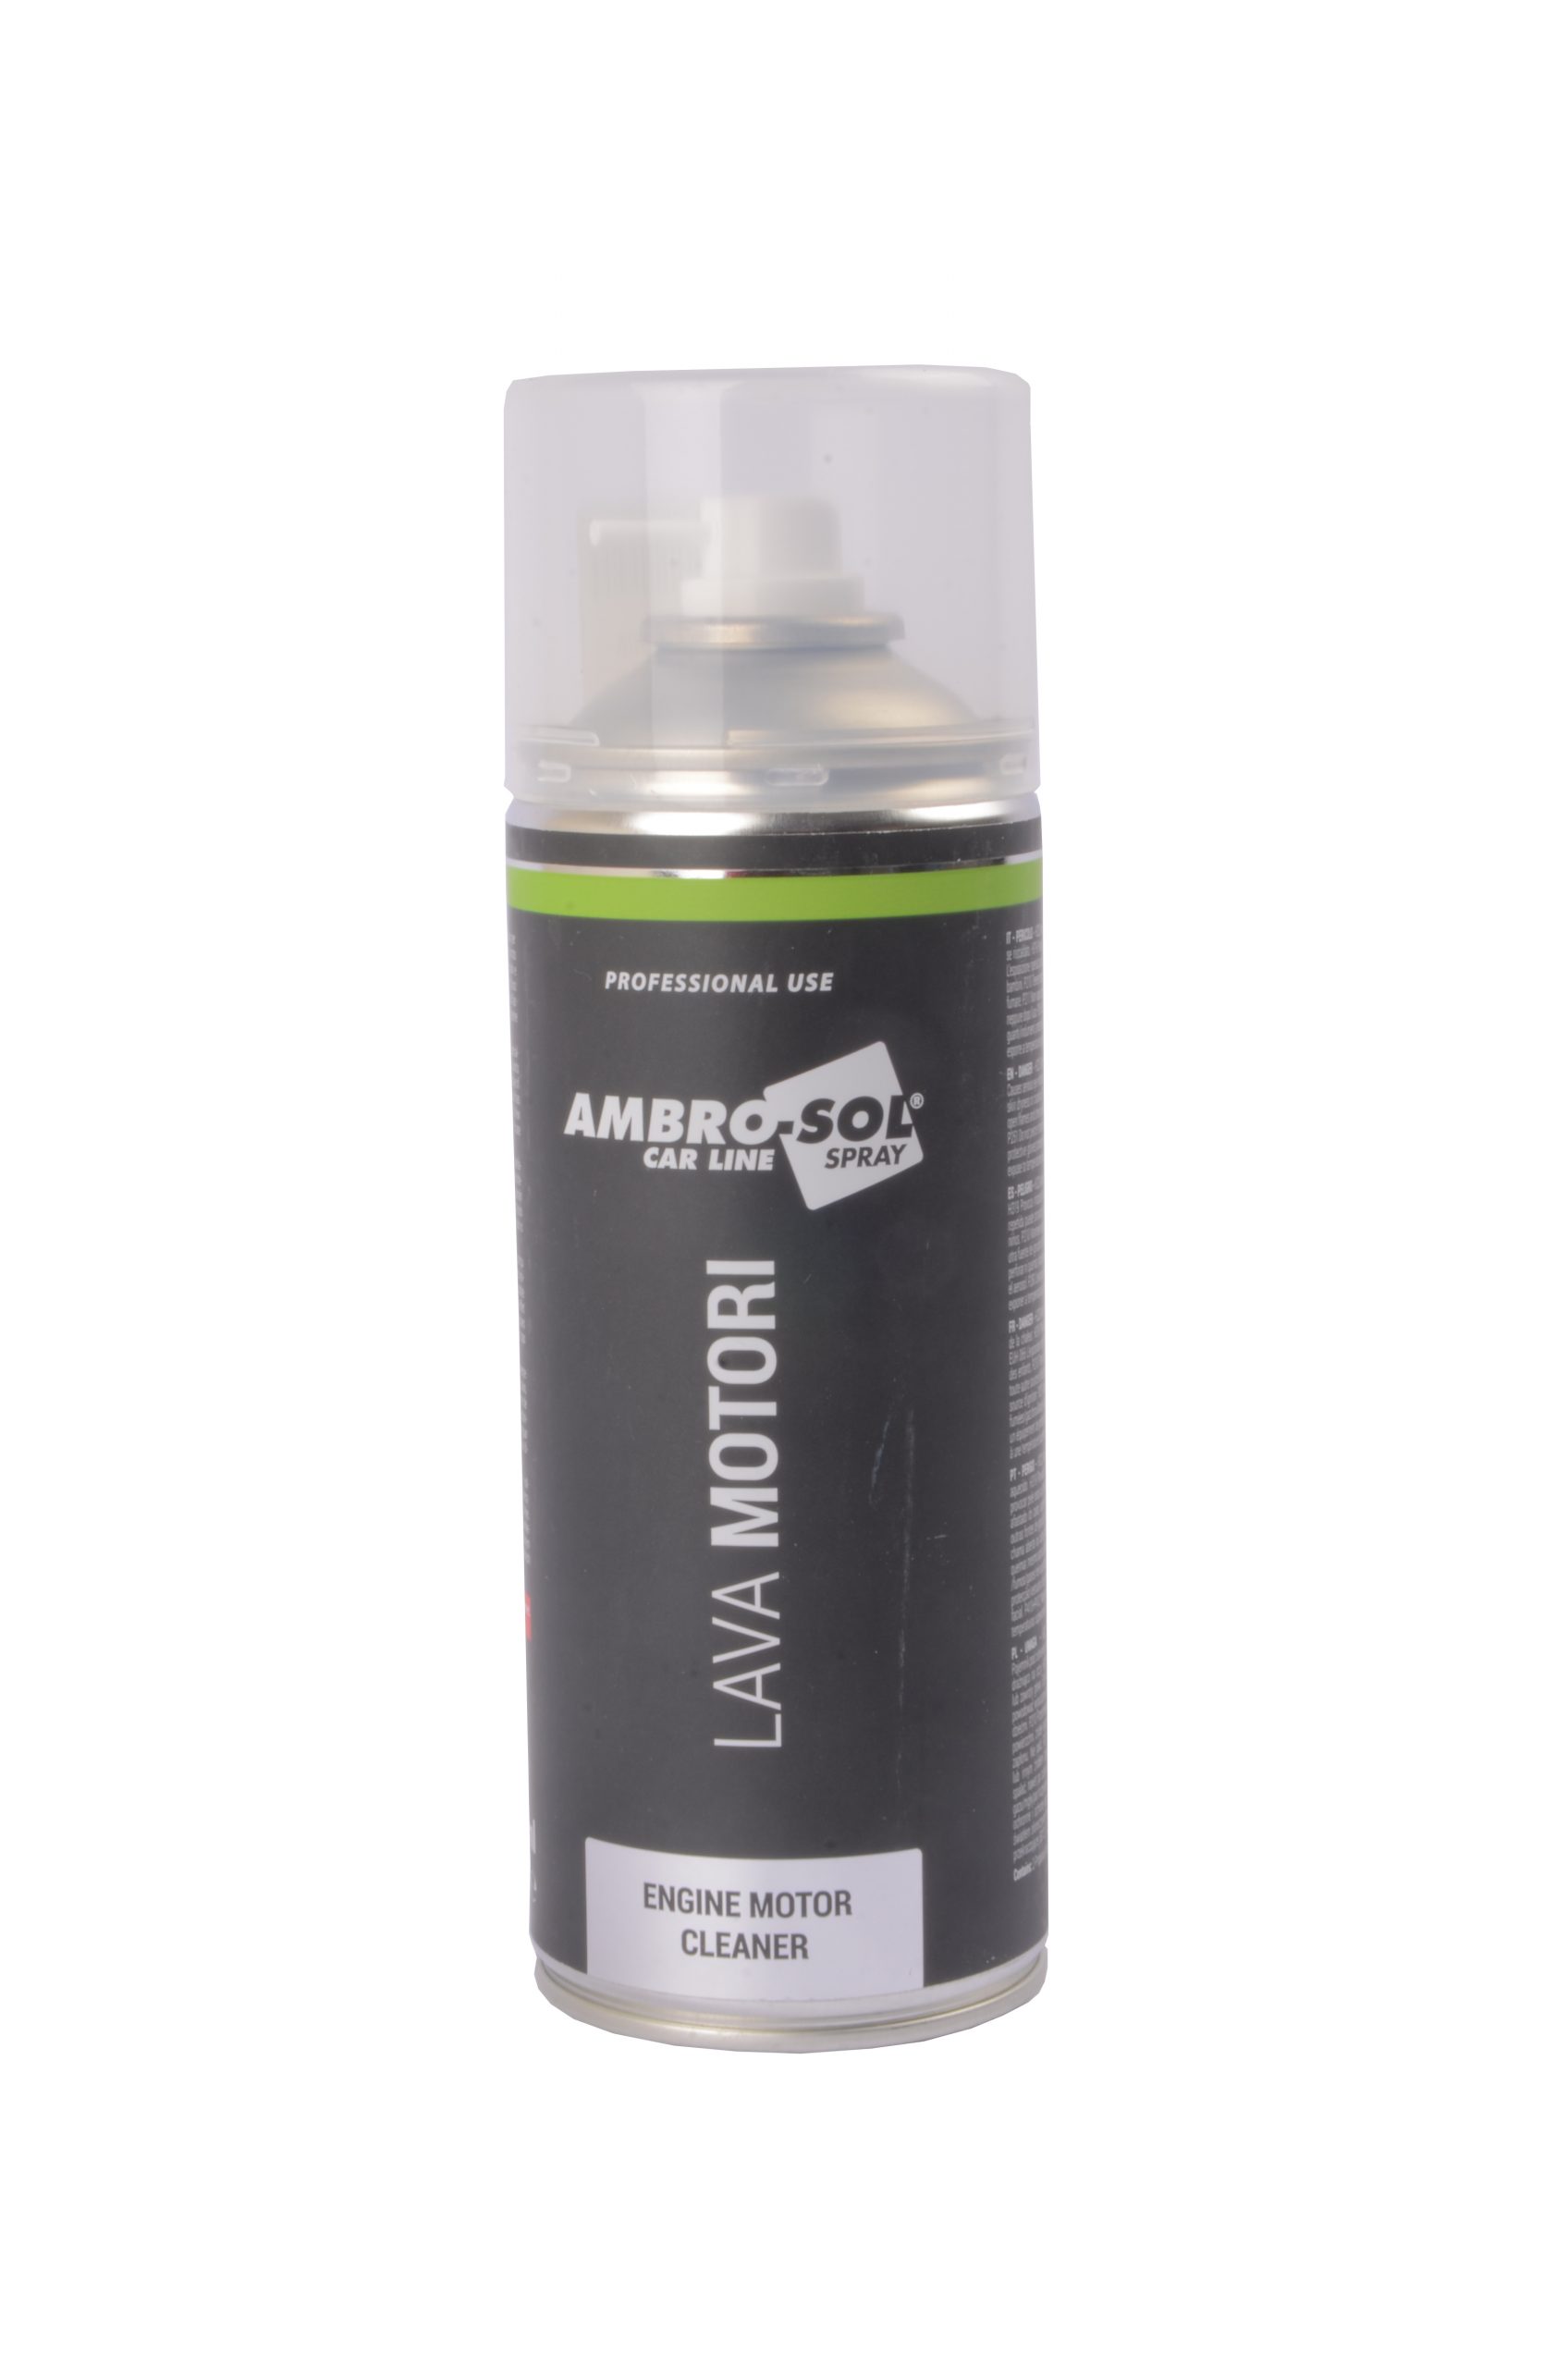 Ambrosol 
	
	Engine Motor Cleaner
	 |  Hardware and Tools |  Vehicle Cleaning |  Industrial Sprays |  Vehicle Supplies